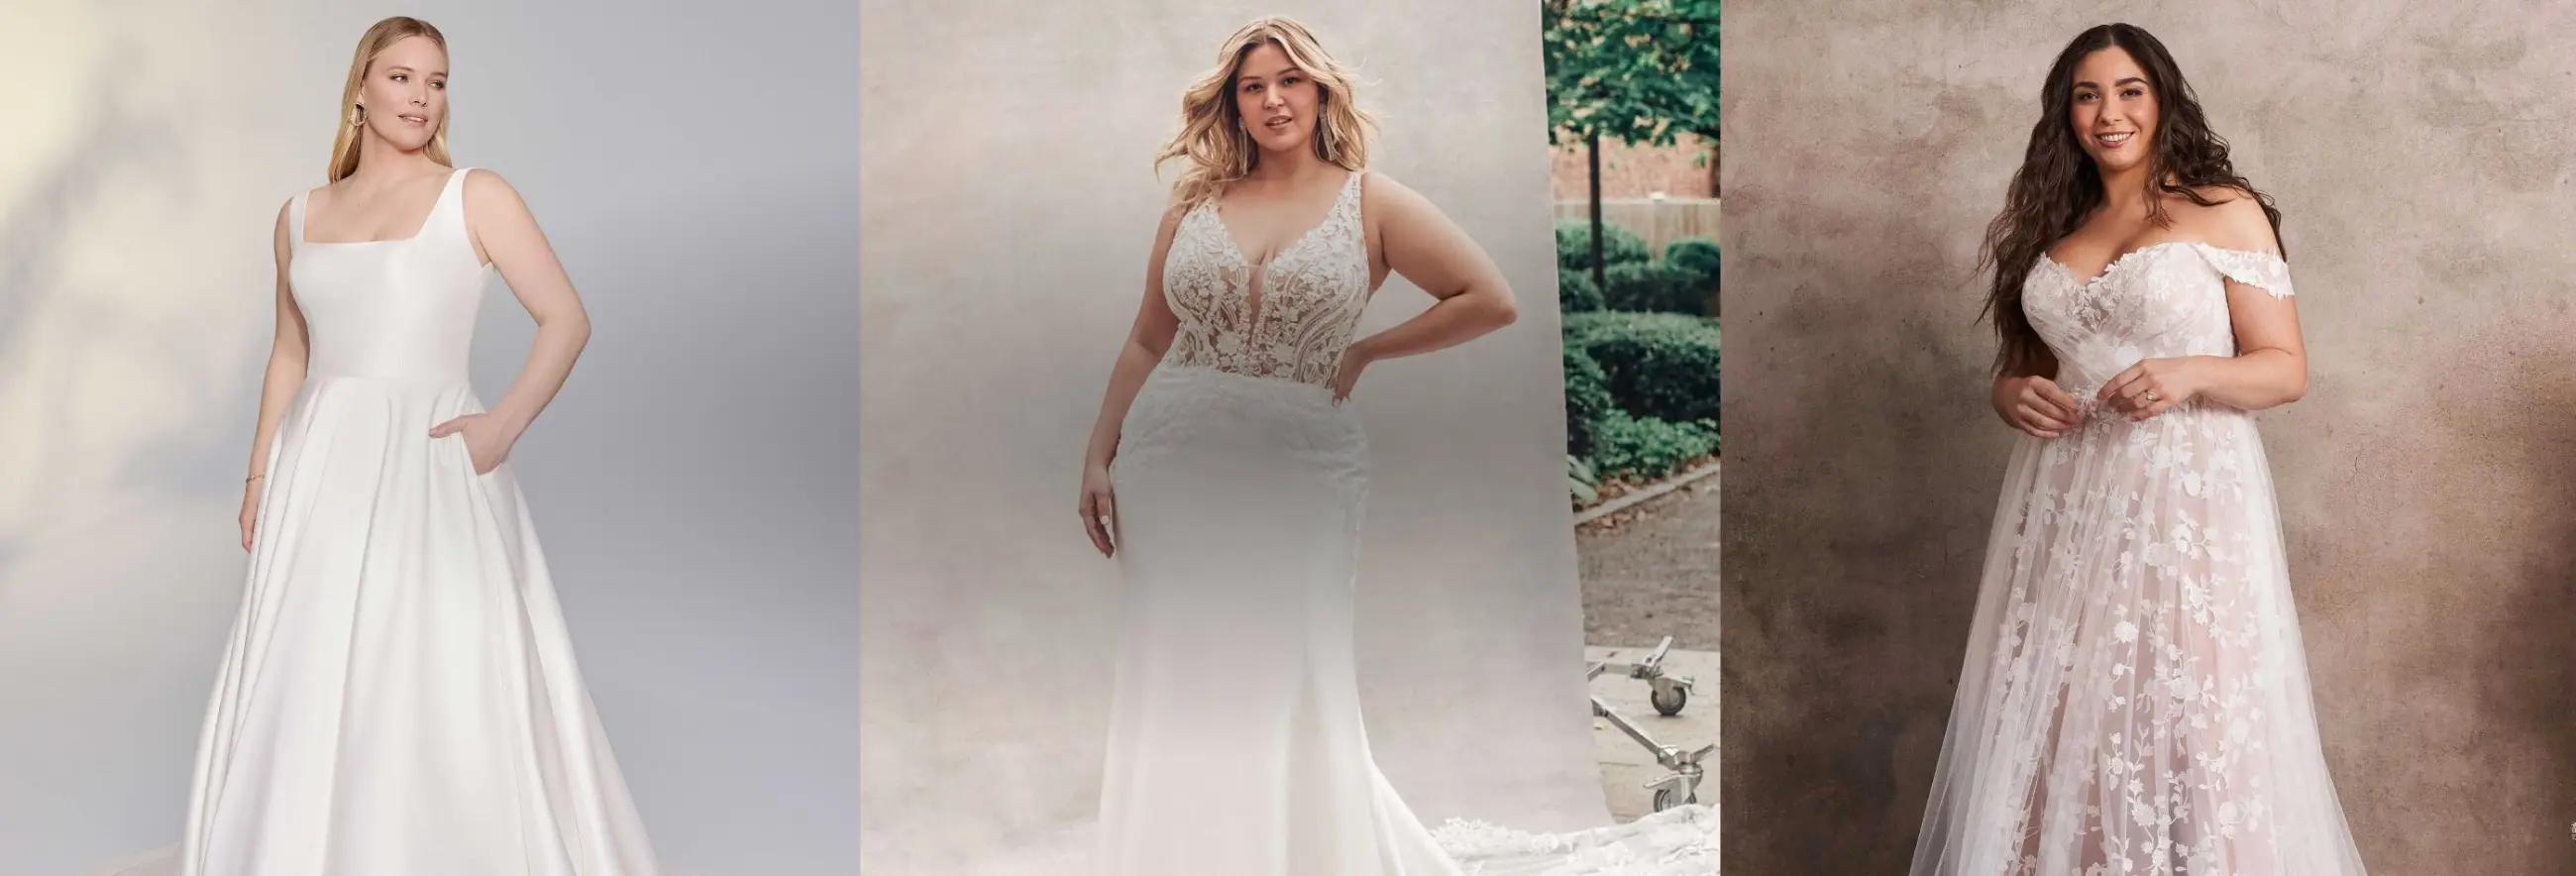 Plus size models wearing a white gown